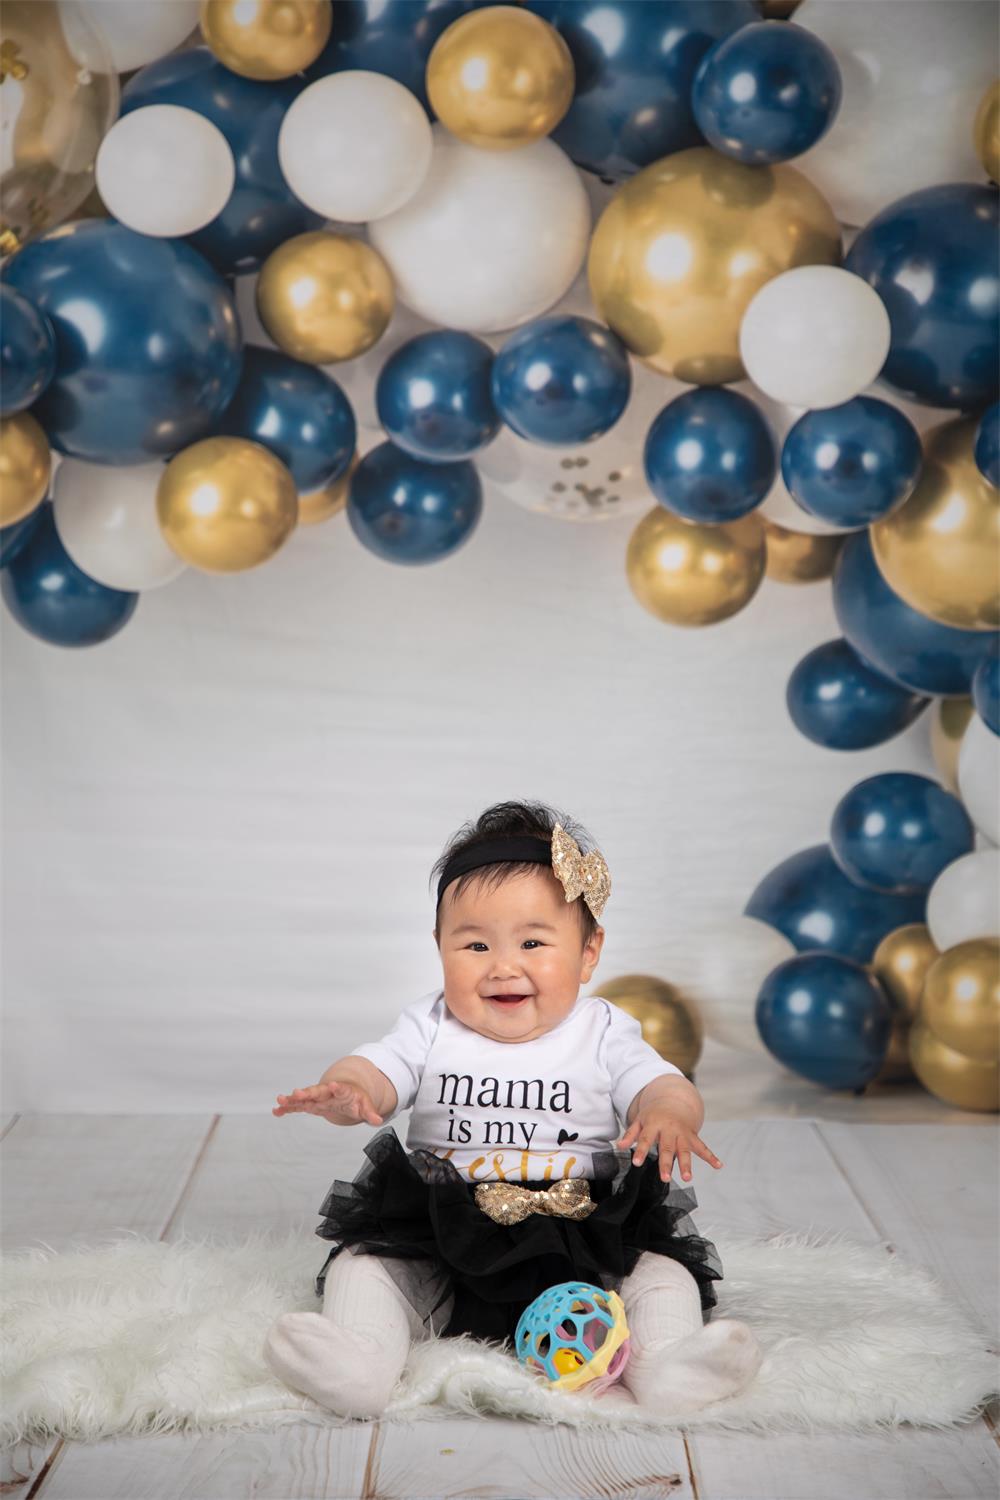 Kate Navy and Gold Balloon Garland Backdrop Designed by Mandy Ringe Photography